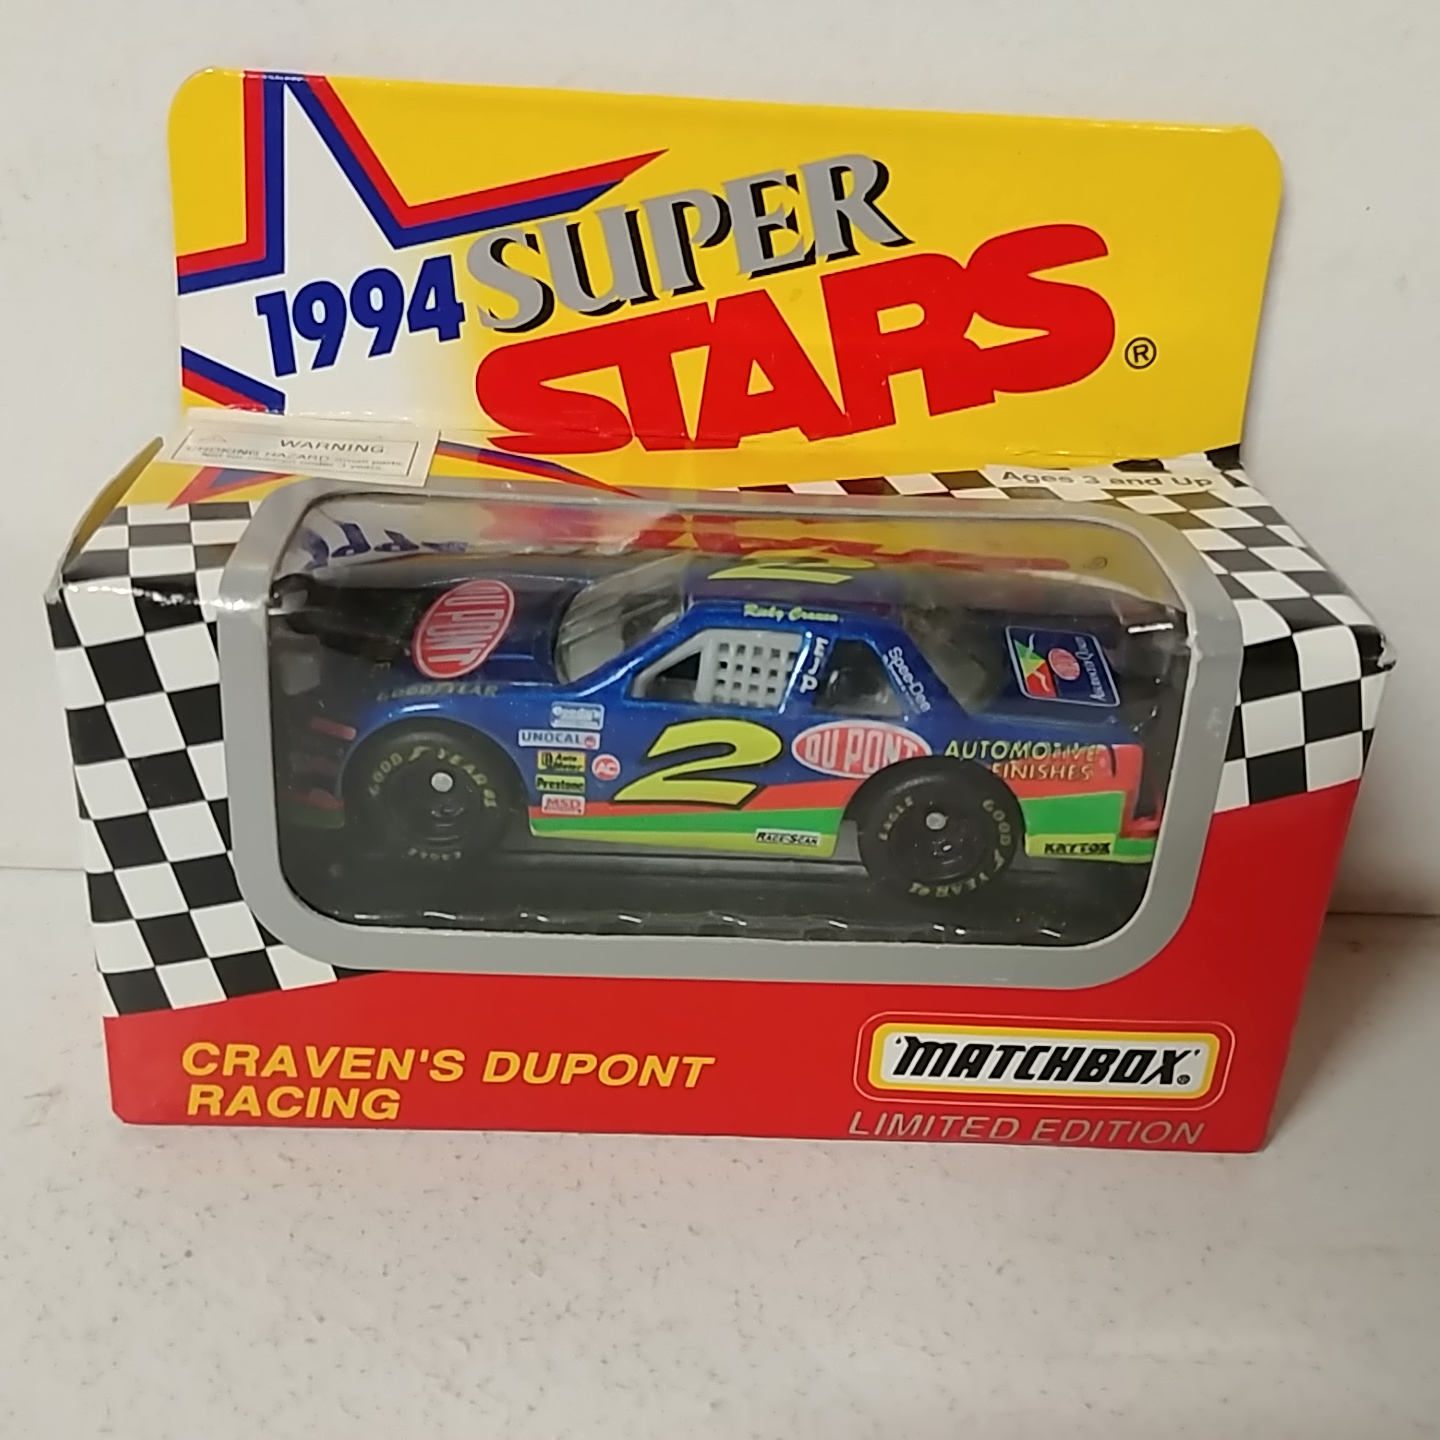 1994 Ricky Craven 1/64th Dupont "Busch Series" car